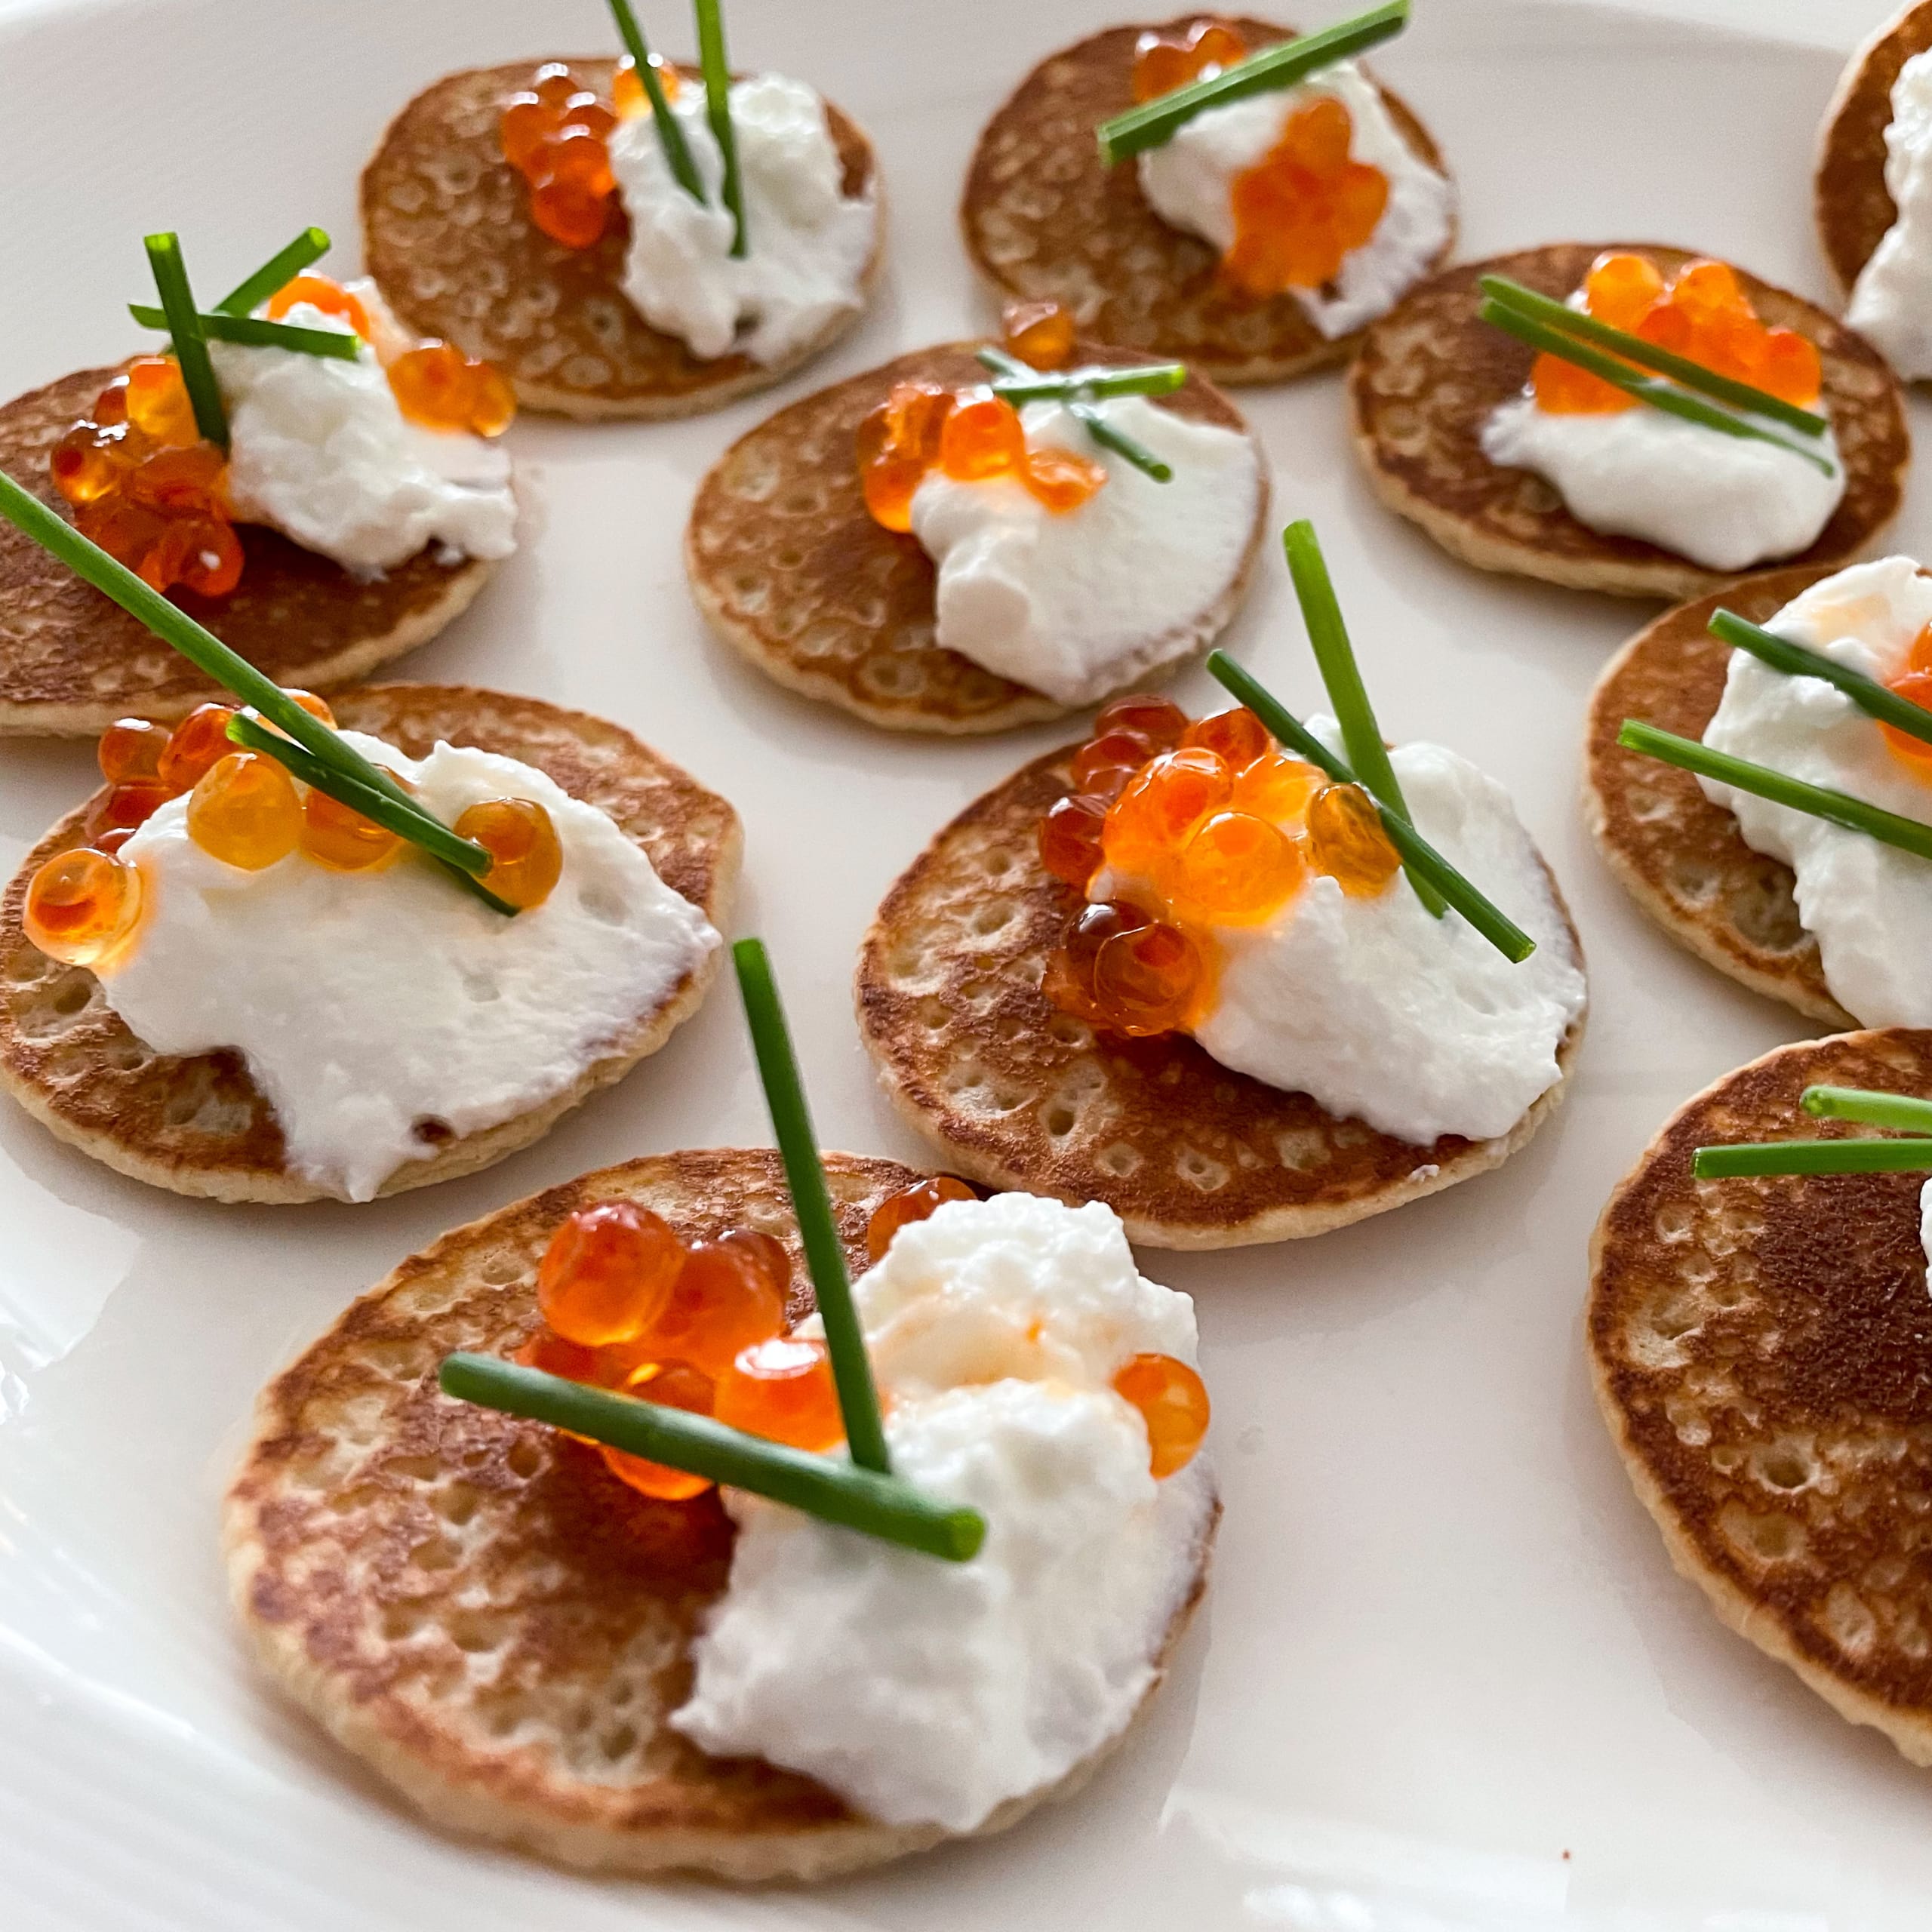 Blini with Fat Free Greek Yogurt, Salmon Roe & Chives | My Curated Tastes